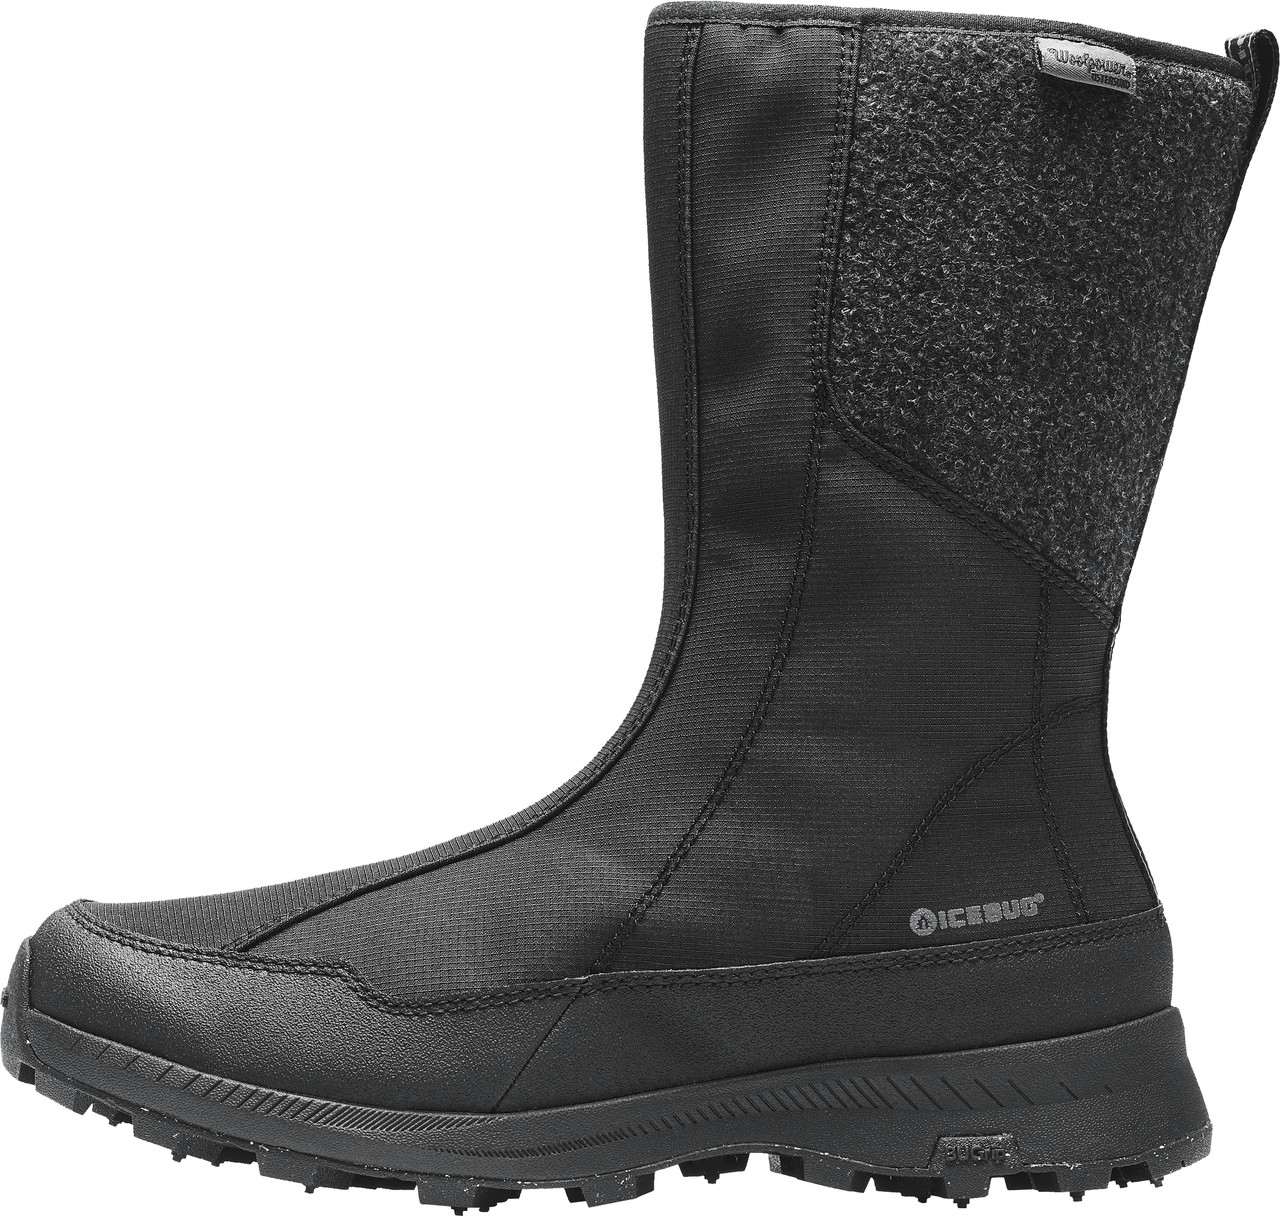 Sund Wool Insulated Water Resistant Boots Black